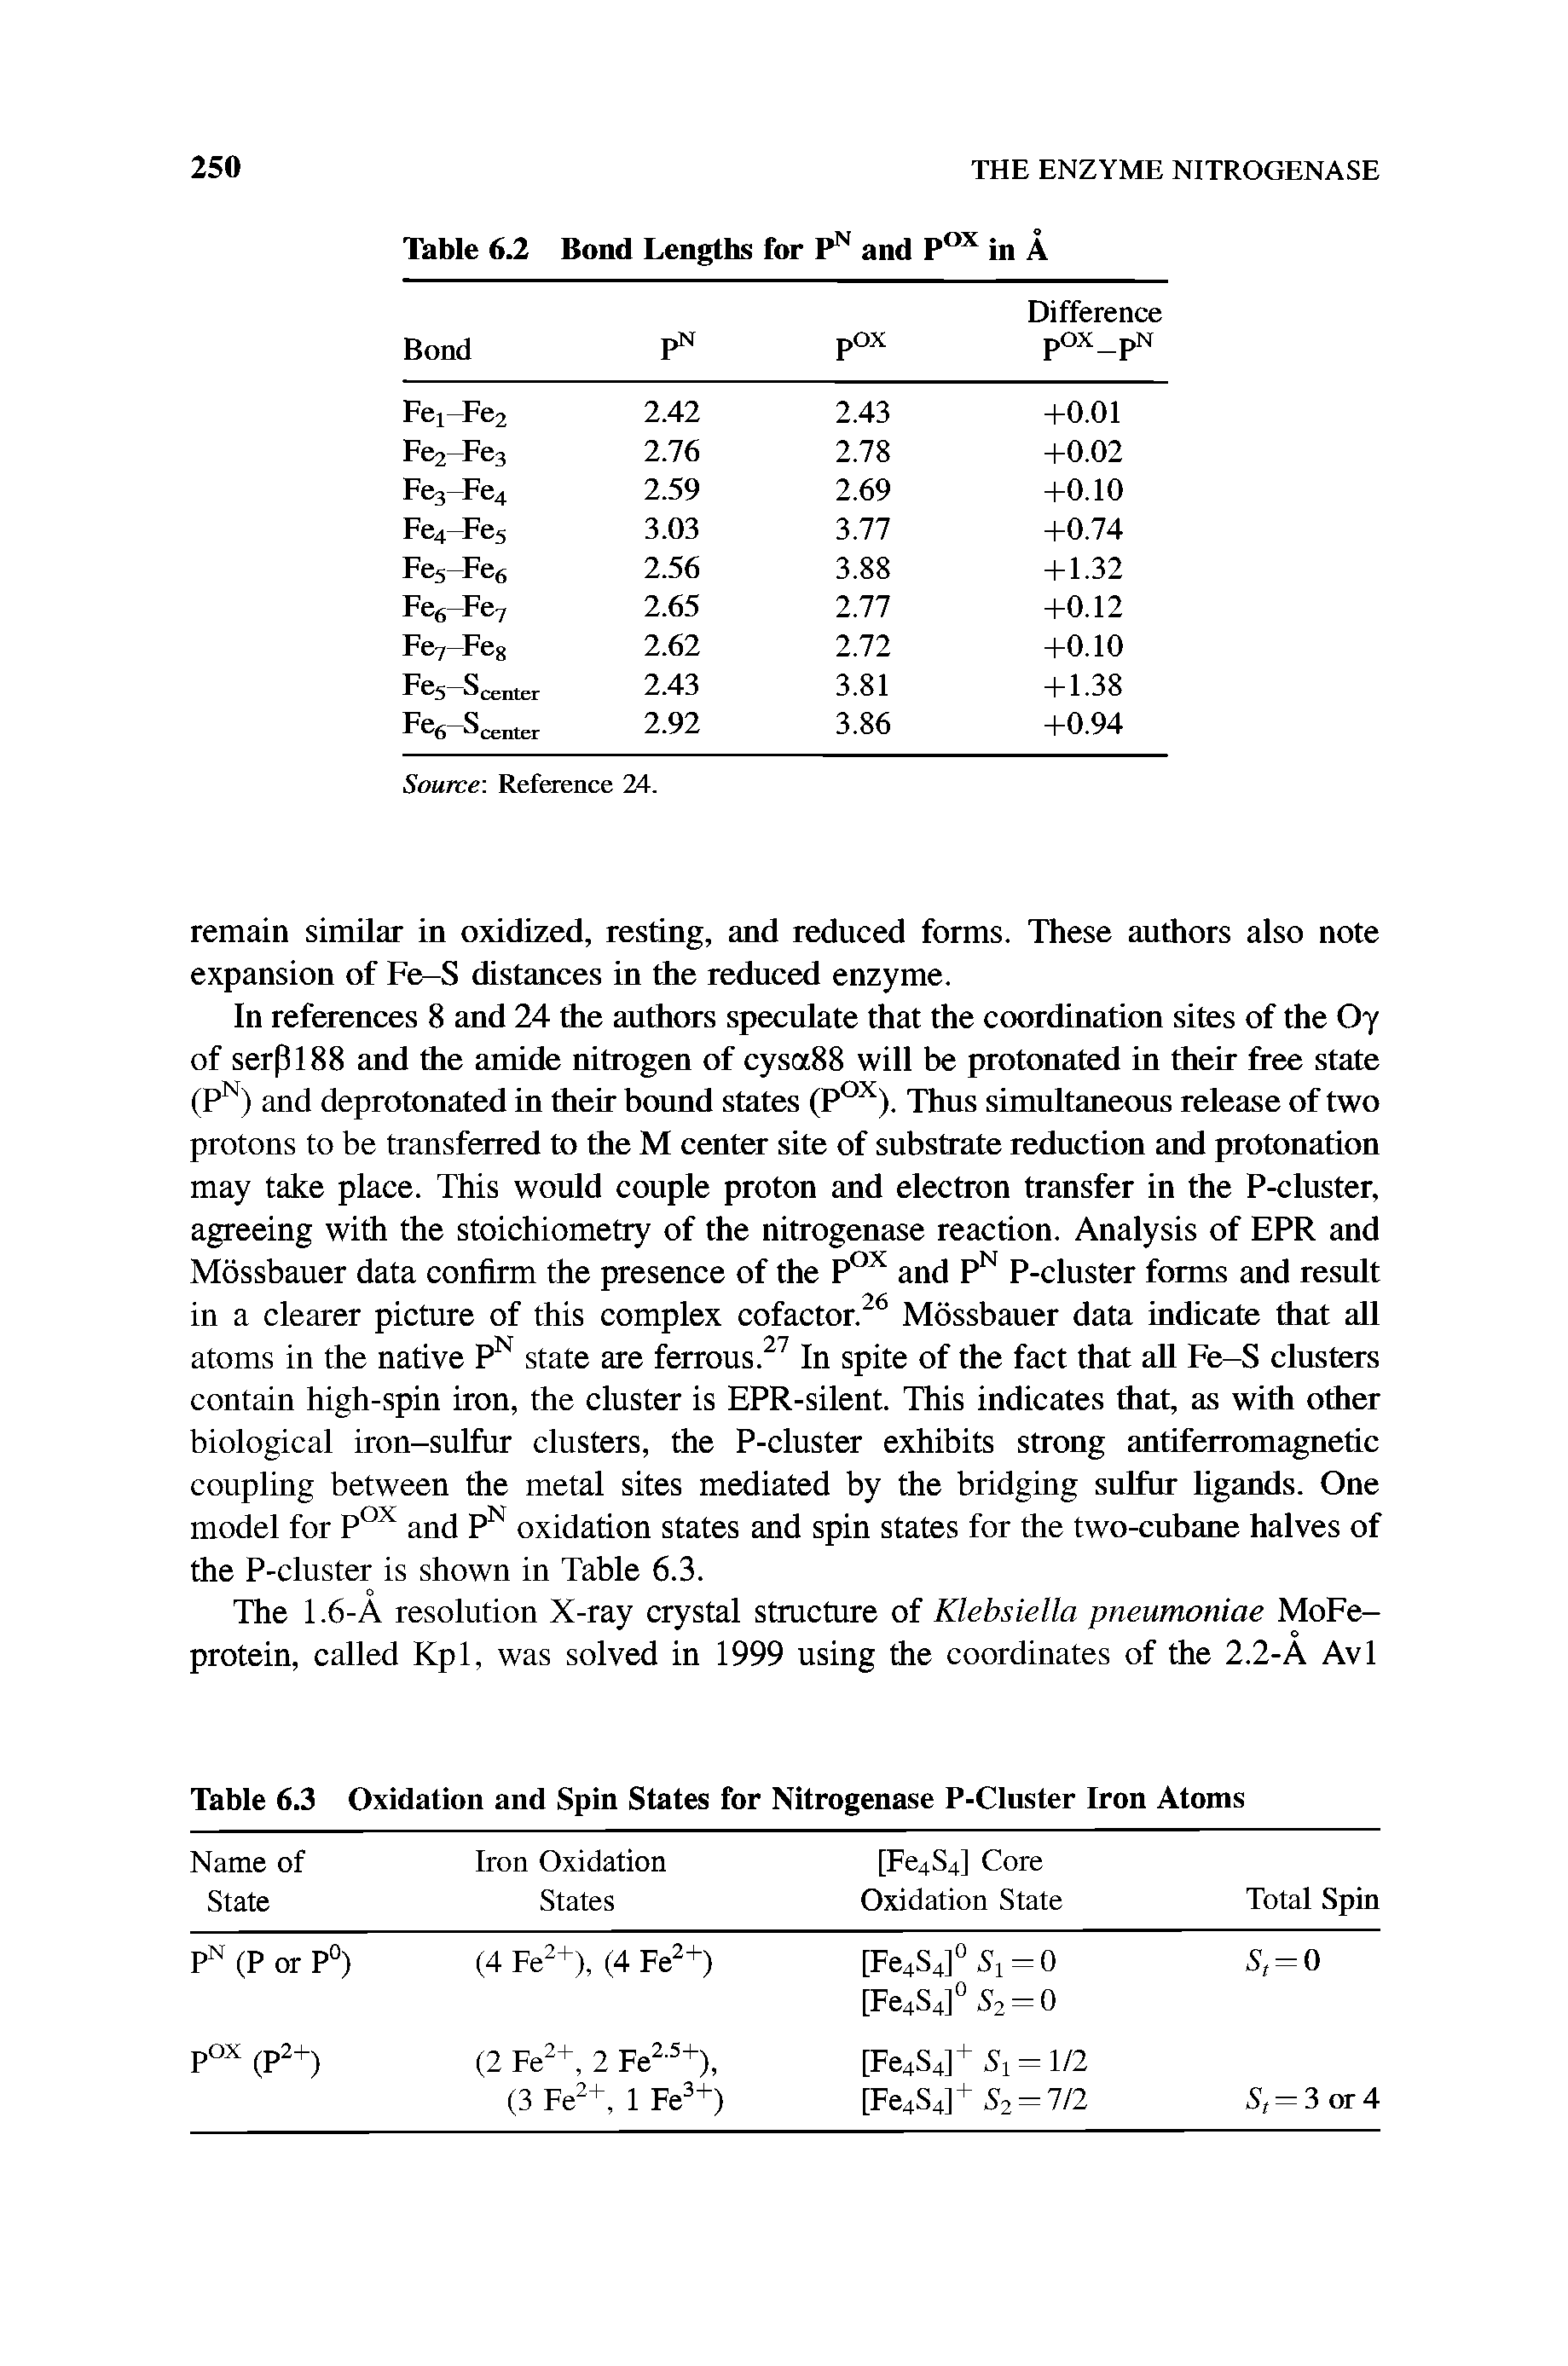 Table 6.3 Oxidation and Spin States for Nitrogenase P-Cluster Iron Atoms...